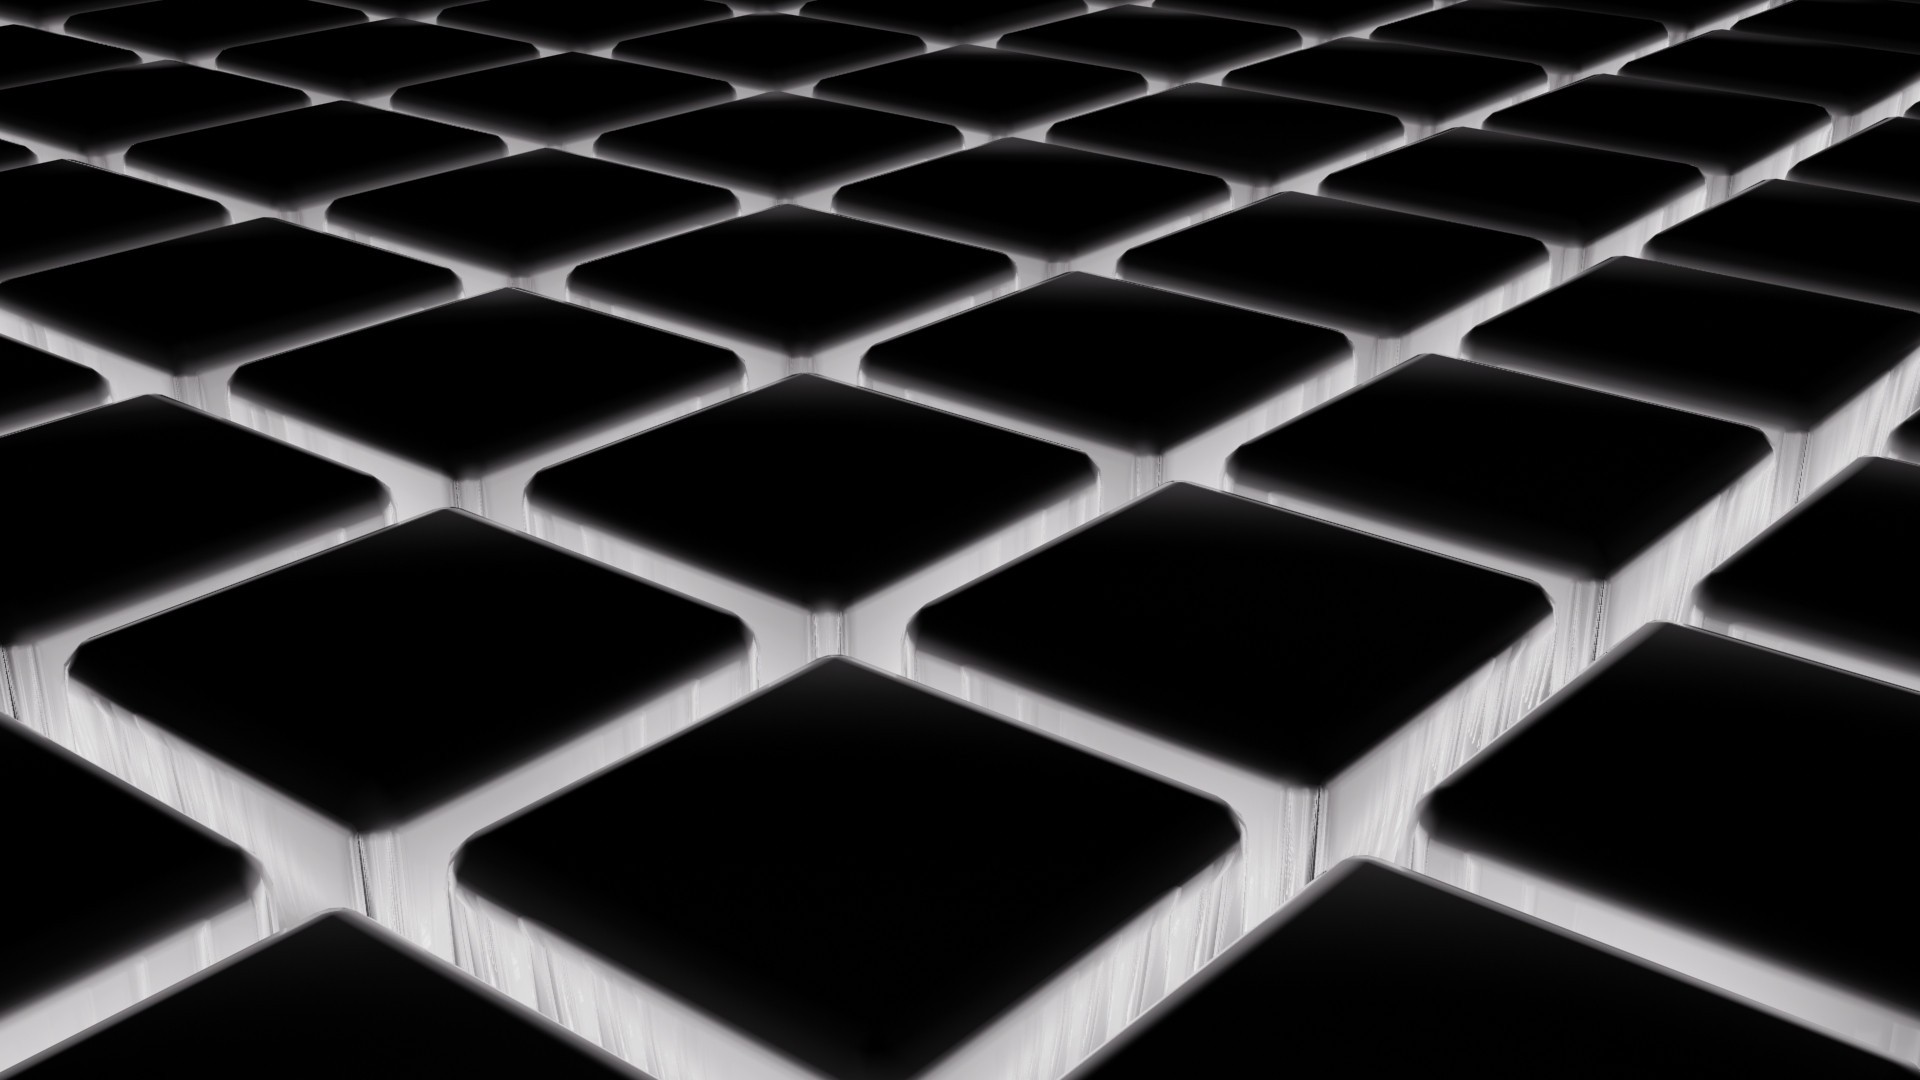 Abstract Grid 3D Blocks Cube Tiles Glowing Black White 1920x1080